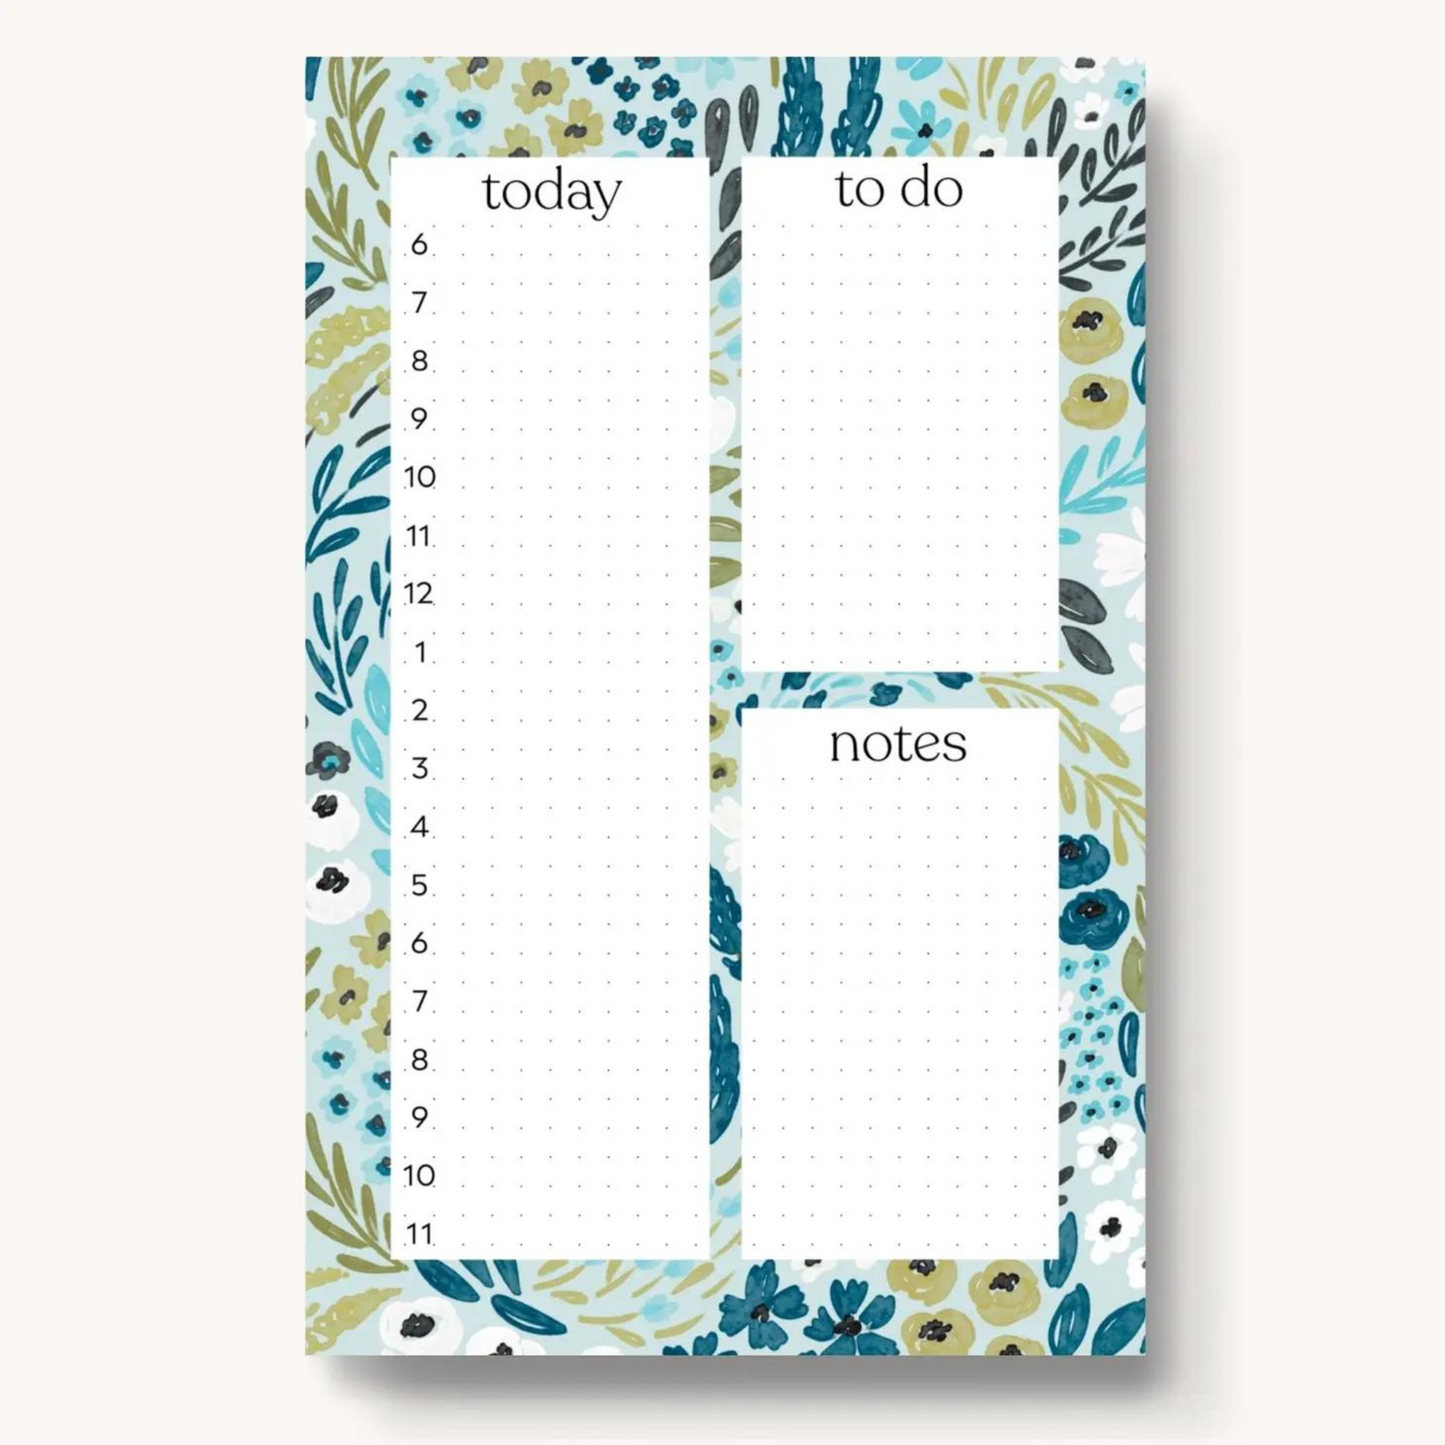 Get organized in style with this cute daily planner note pad, complete with fun graphics and ample writing space.